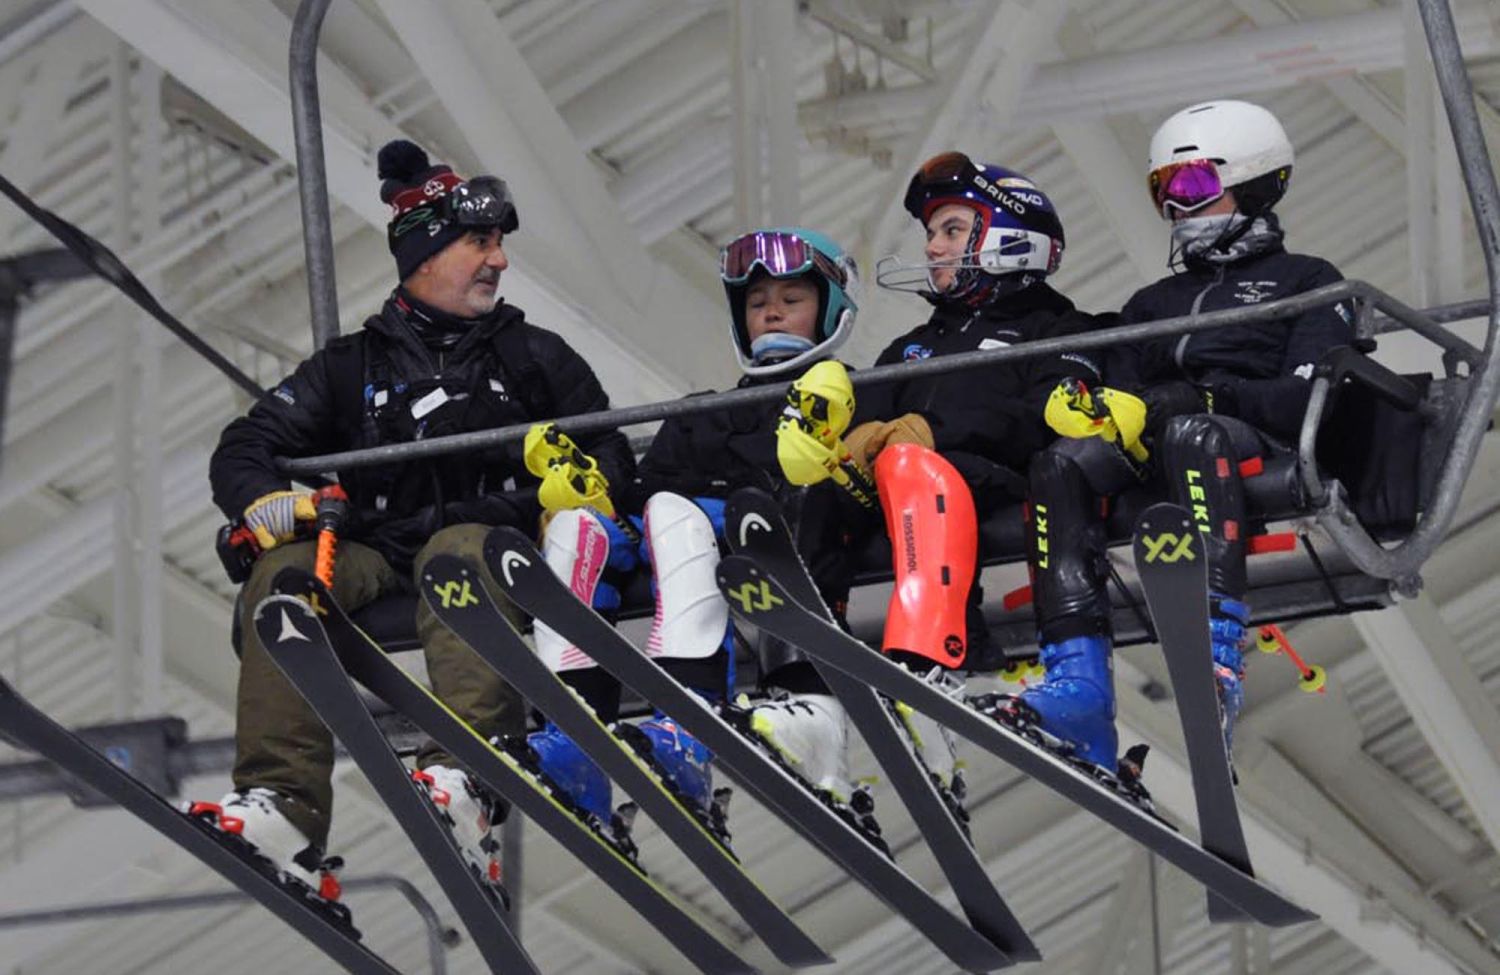 Coach Rod riding lift with racers